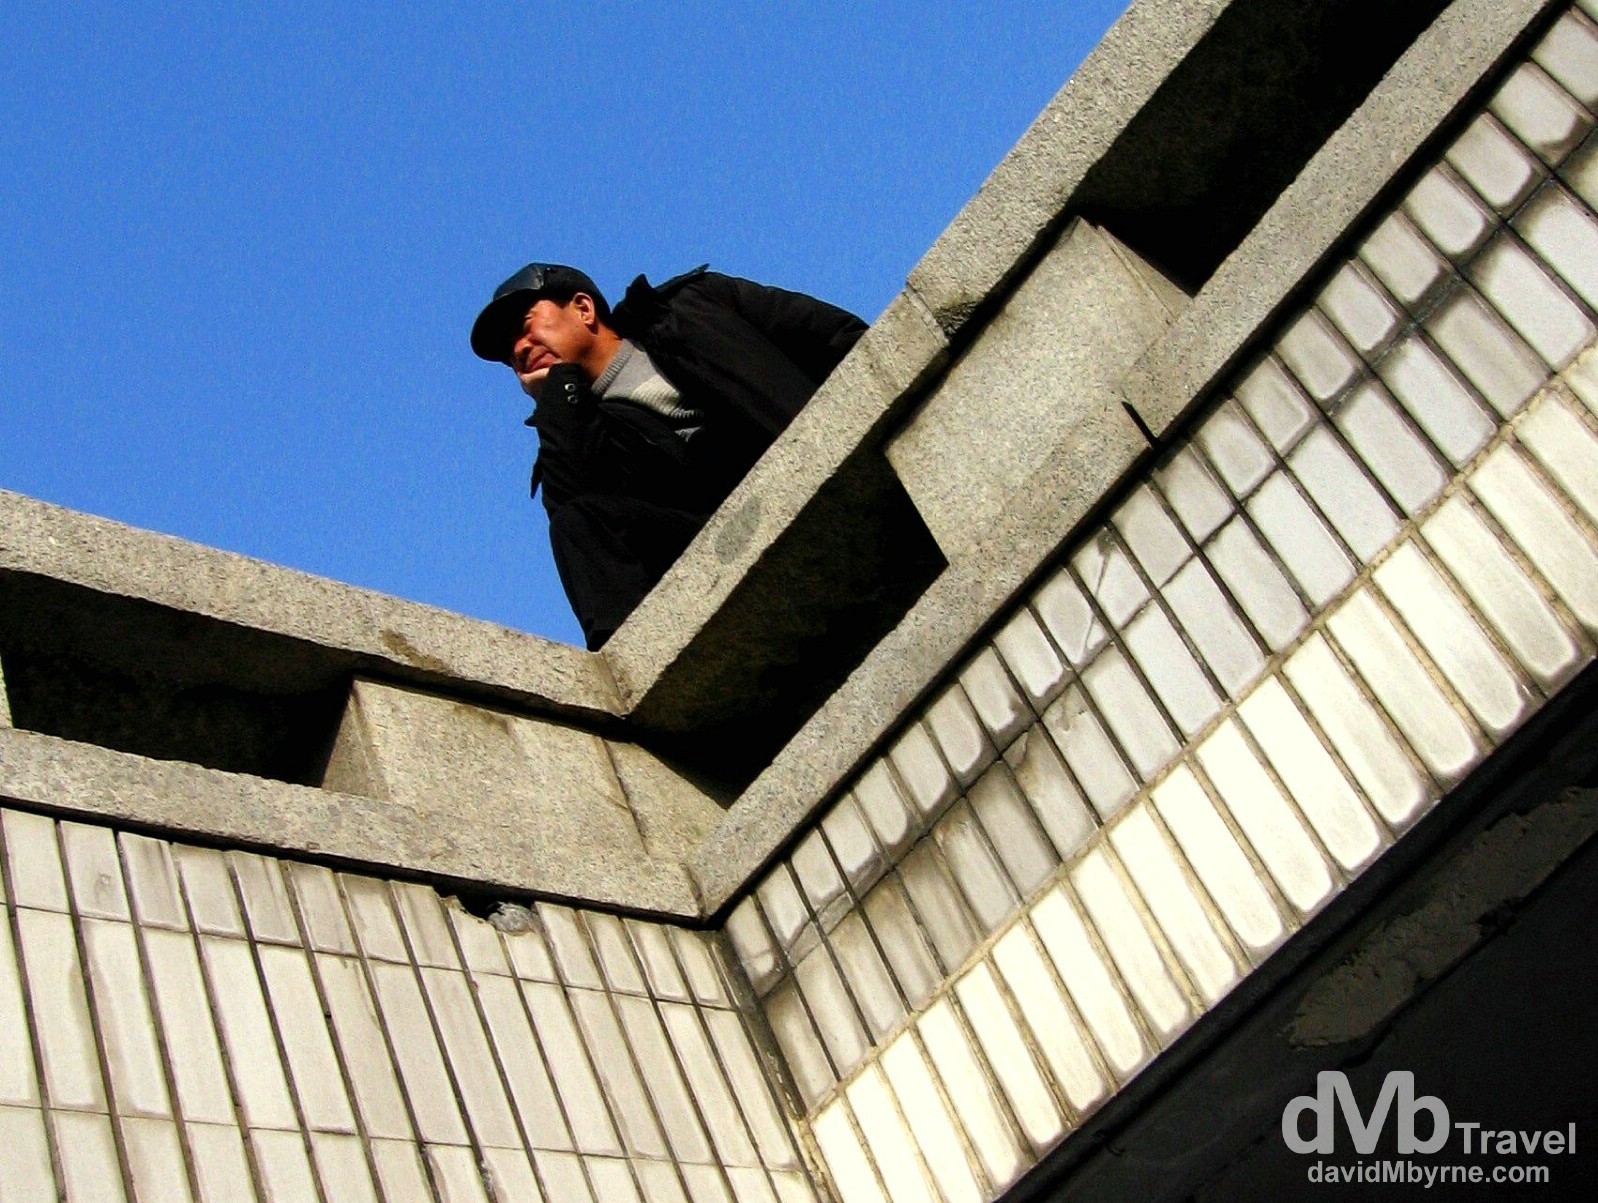 Watching life go by at an overpass in Beijing, China. February 10, 2006. 